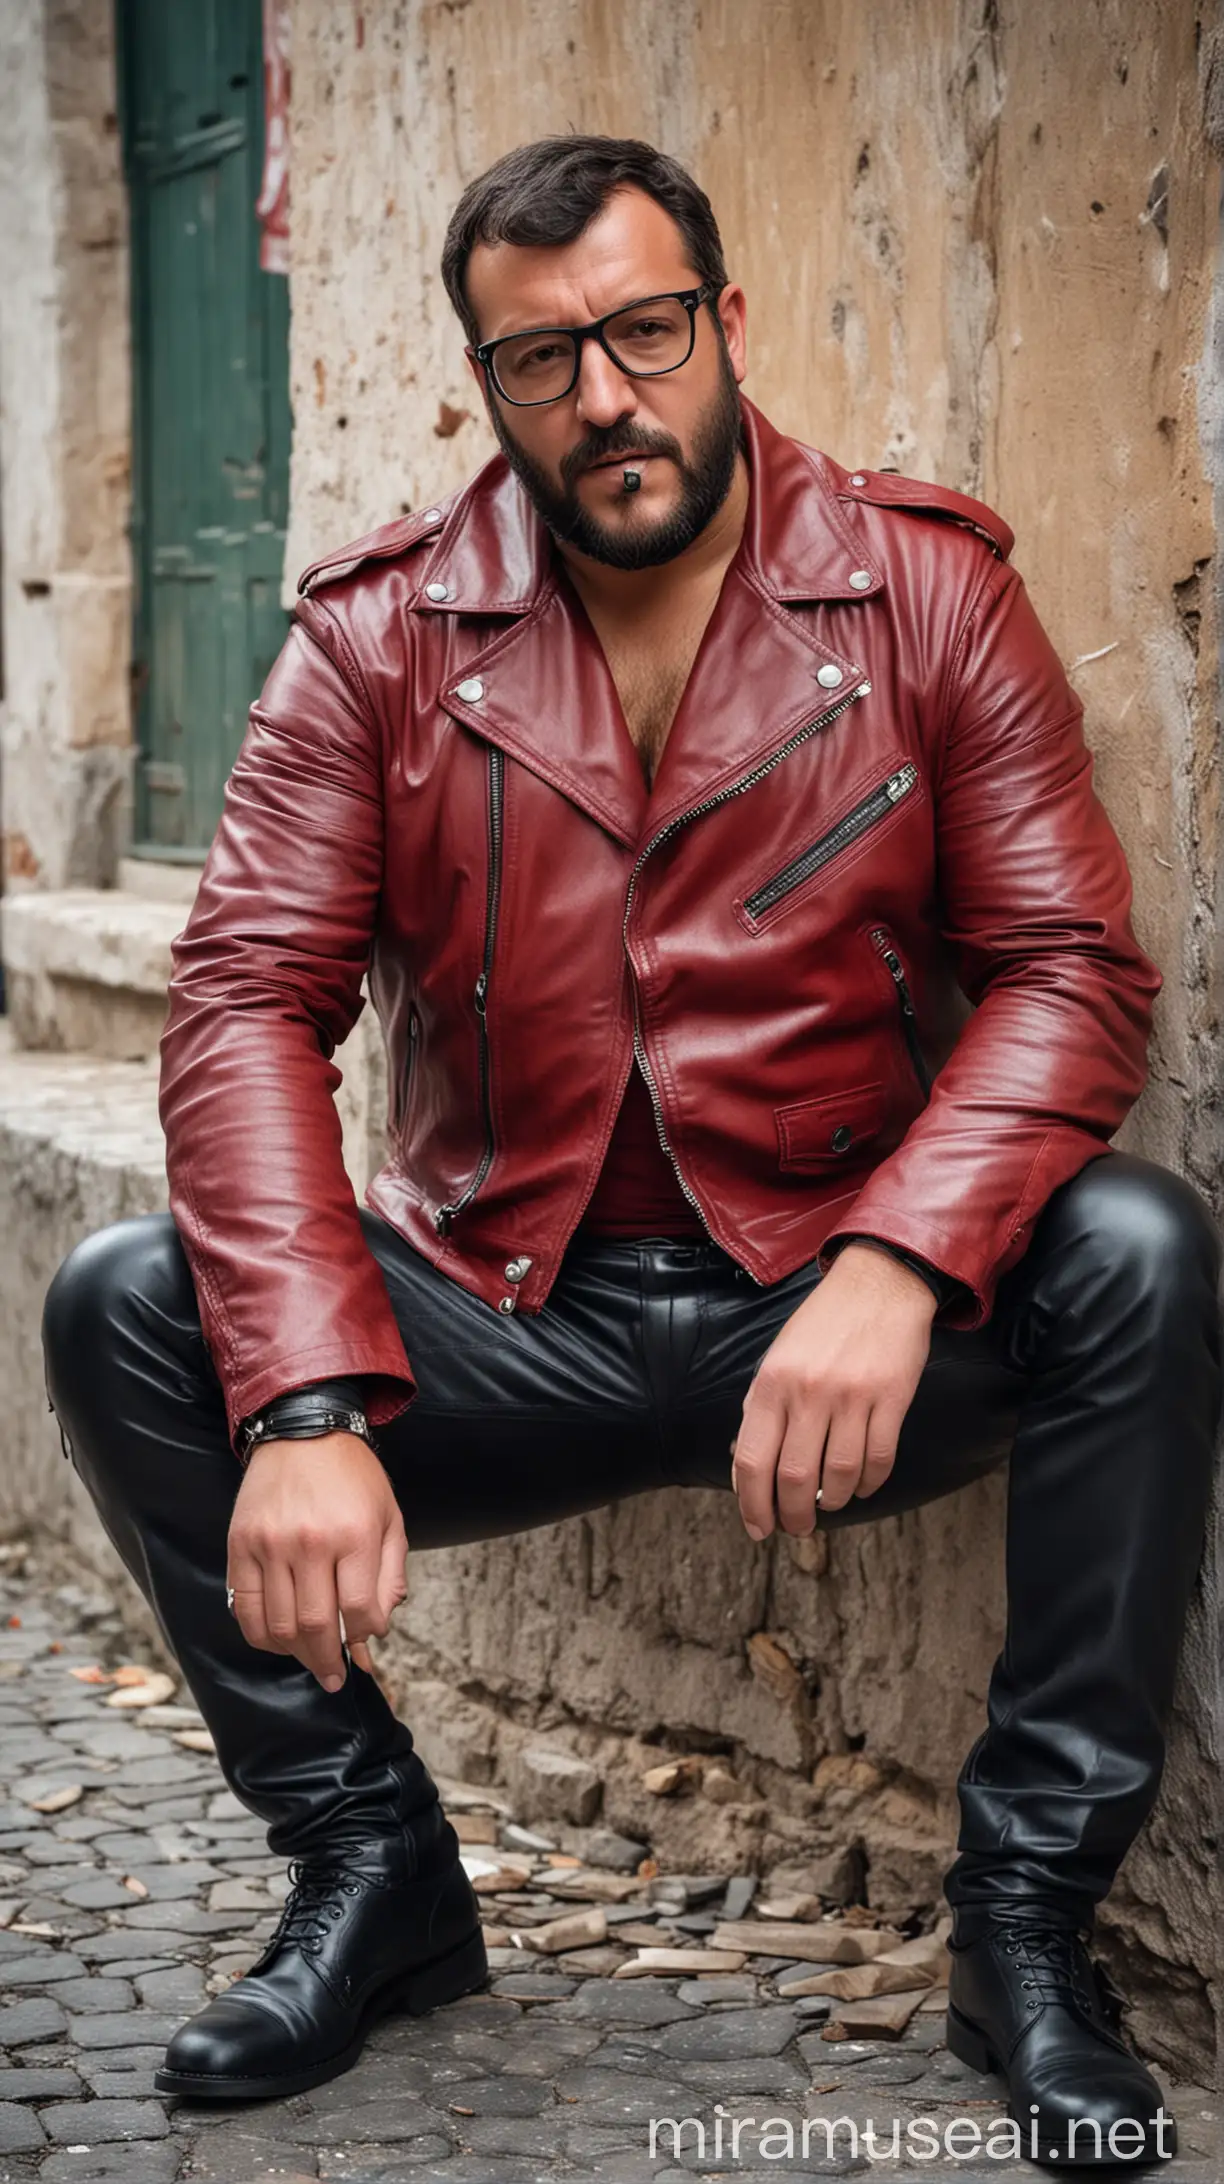 Matteo Salvini Smoking Cigar in Tight Leather Biker Outfit